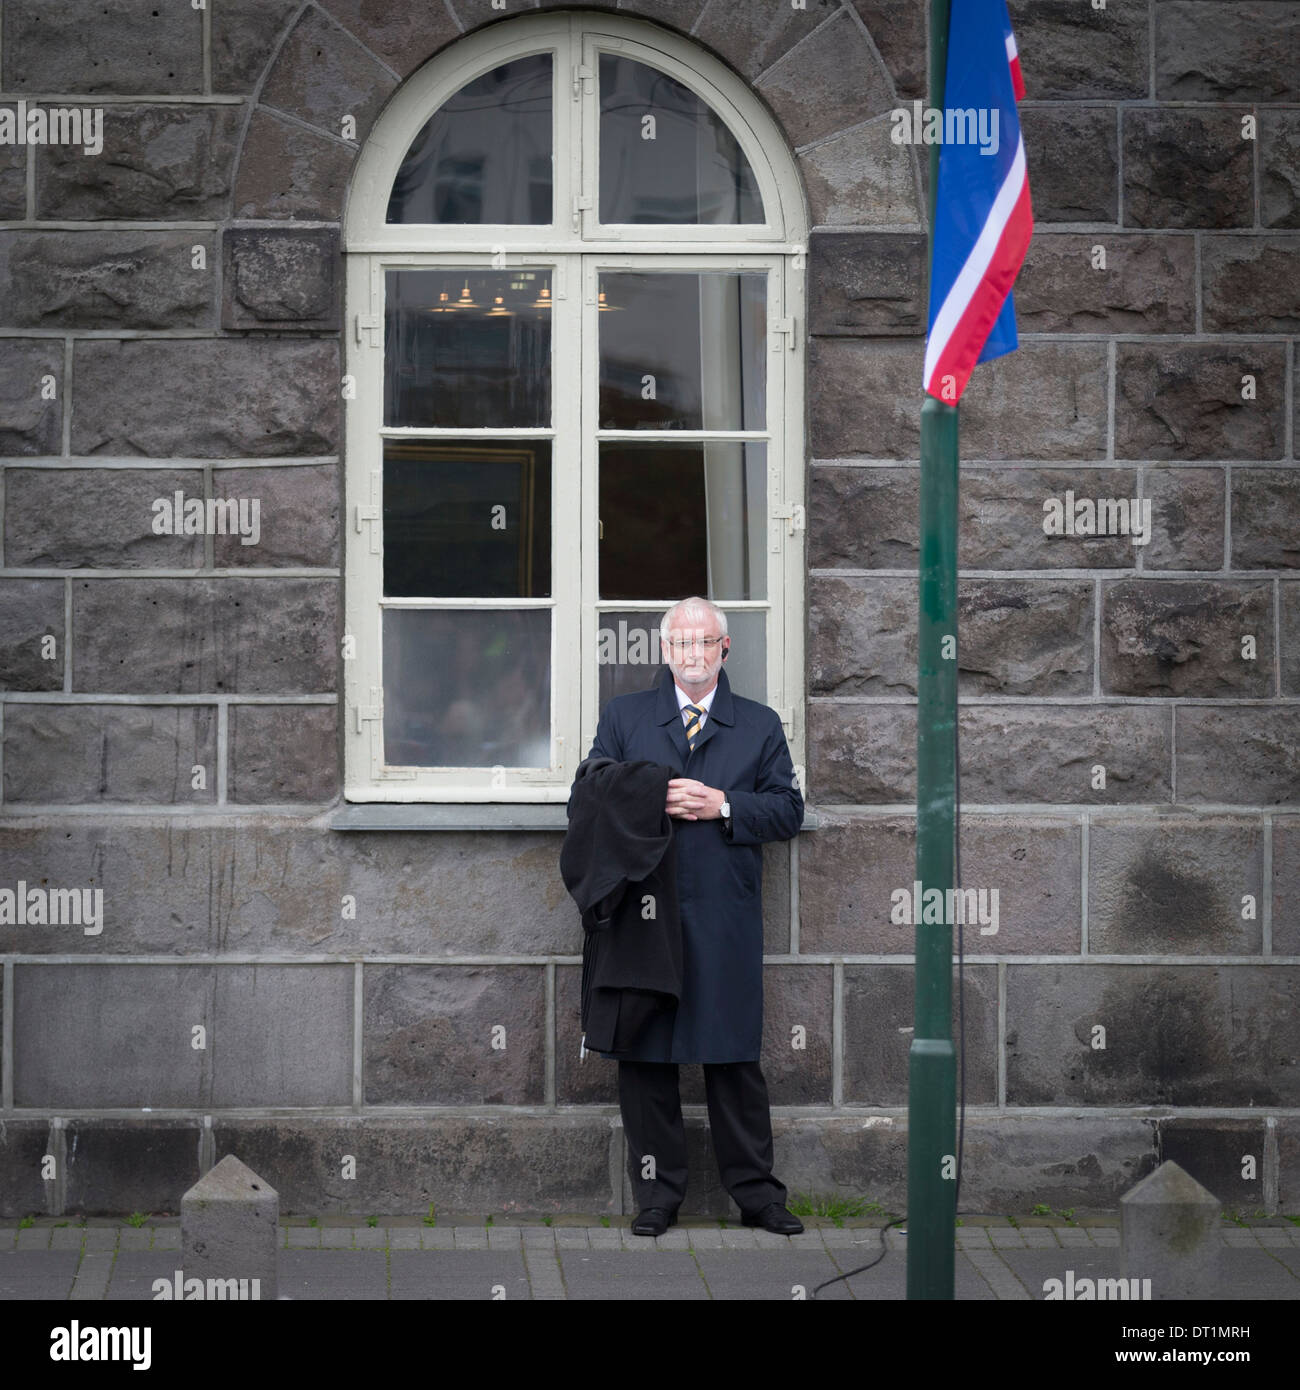 Undercover security in front of the Parliament building during June 17th, Iceland´s Independence Day, Reykjavik, Iceland Stock Photo